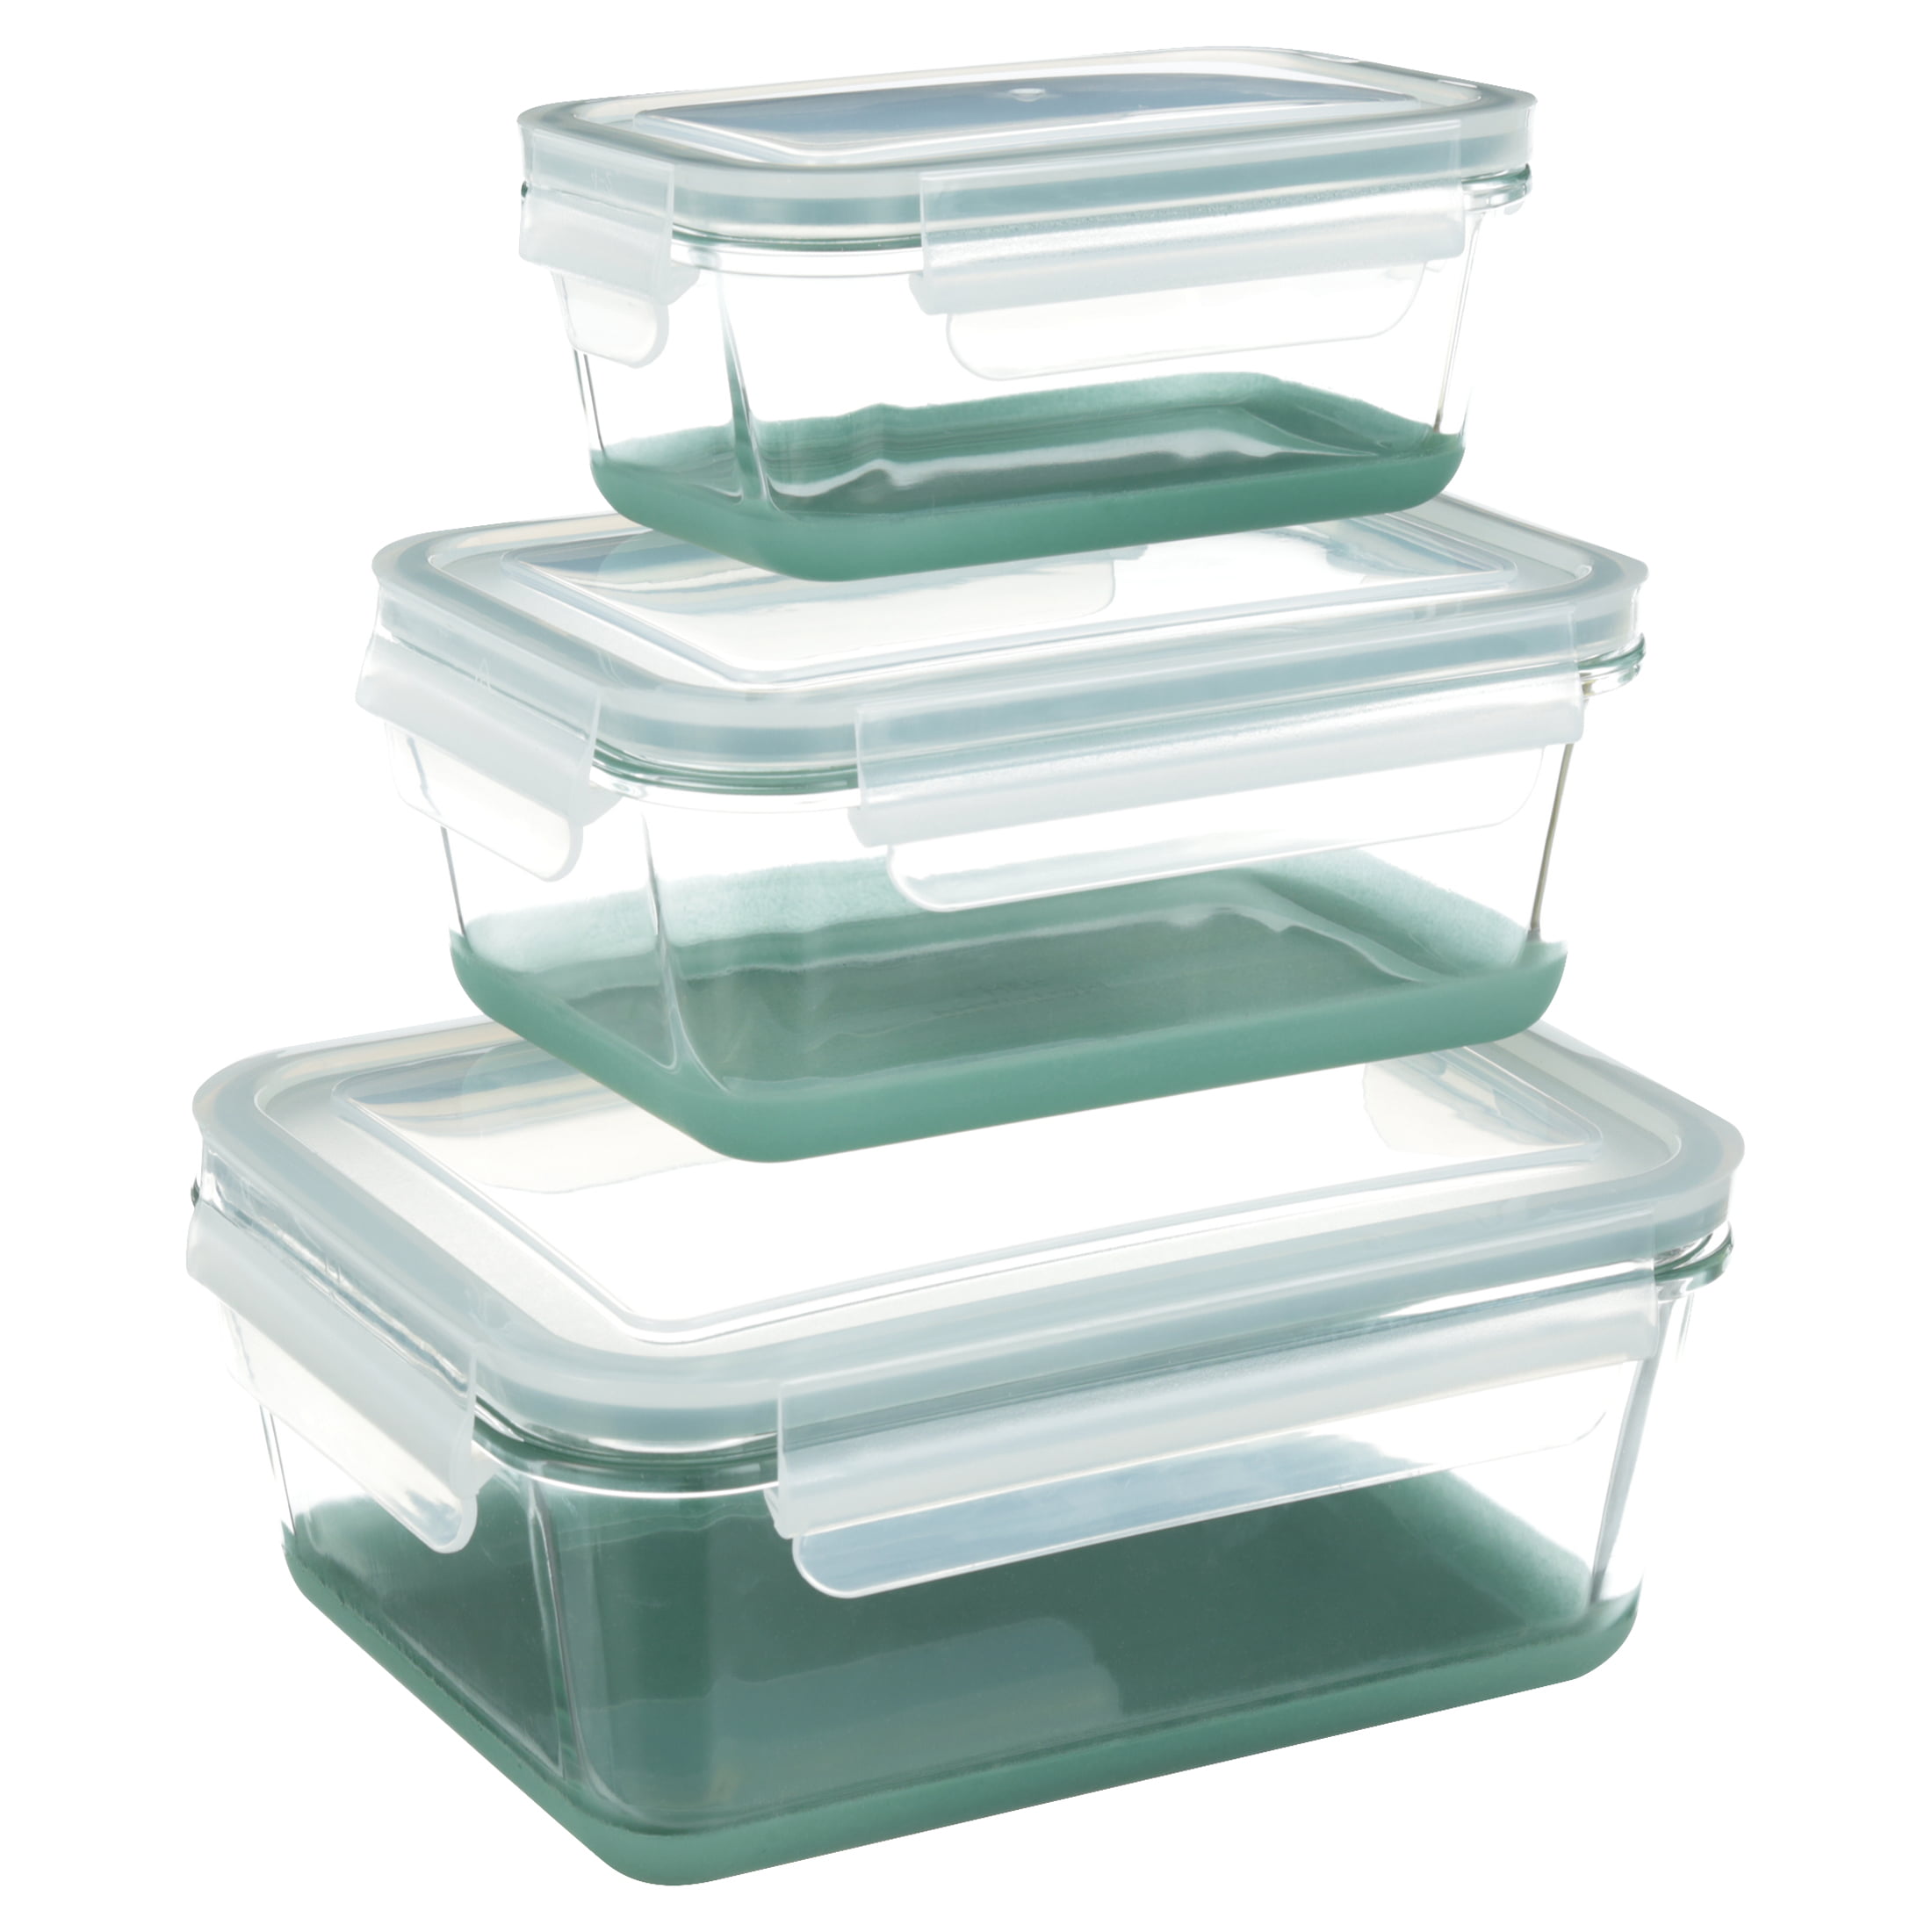 Phantom Chef Set of 3 Glass Nestable Food Storage Containers - Navy